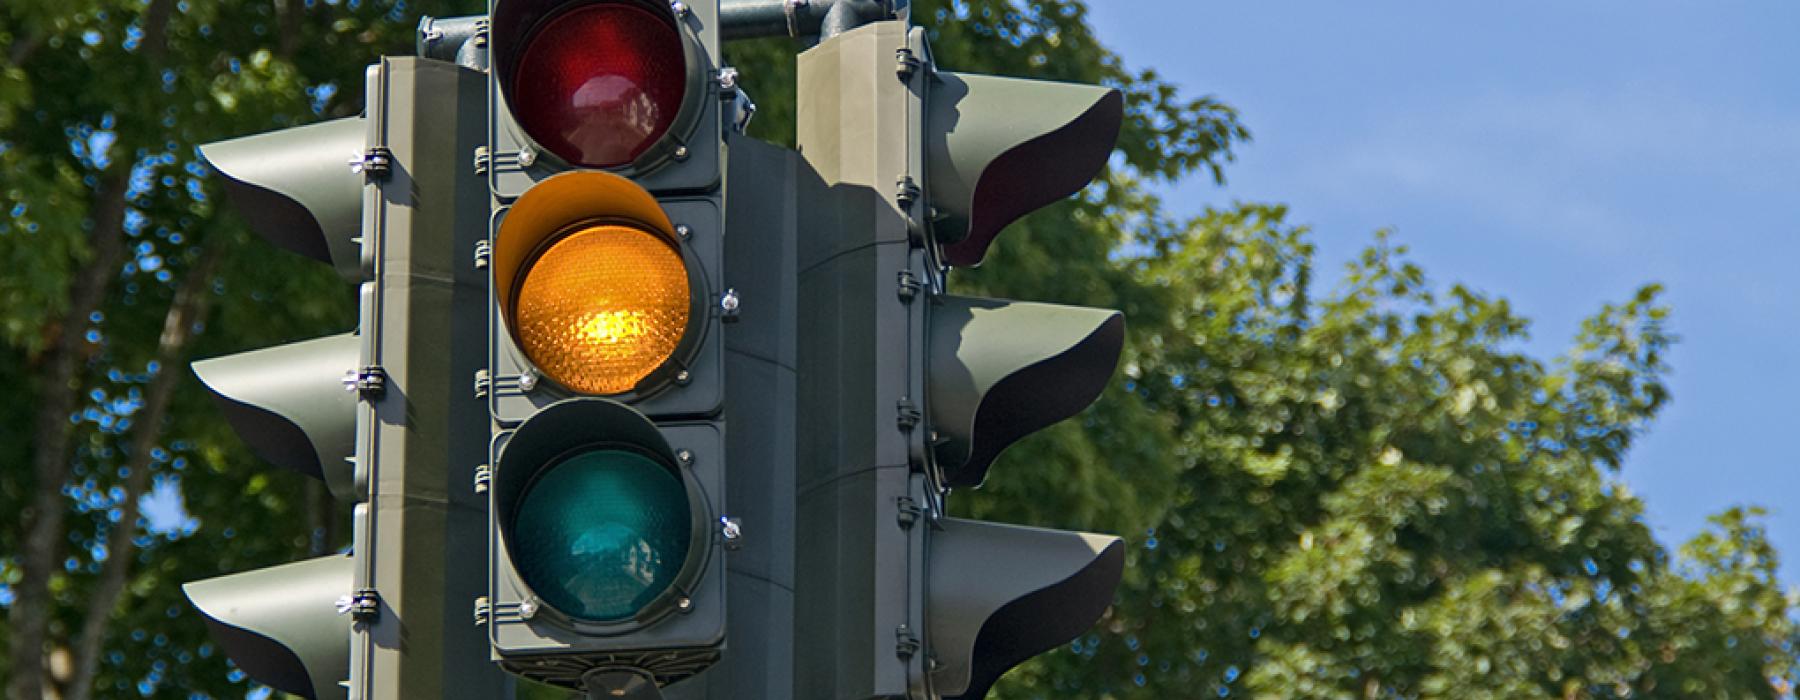 A  three-tiered traffic signal with the middle signal, a yellow light activated.